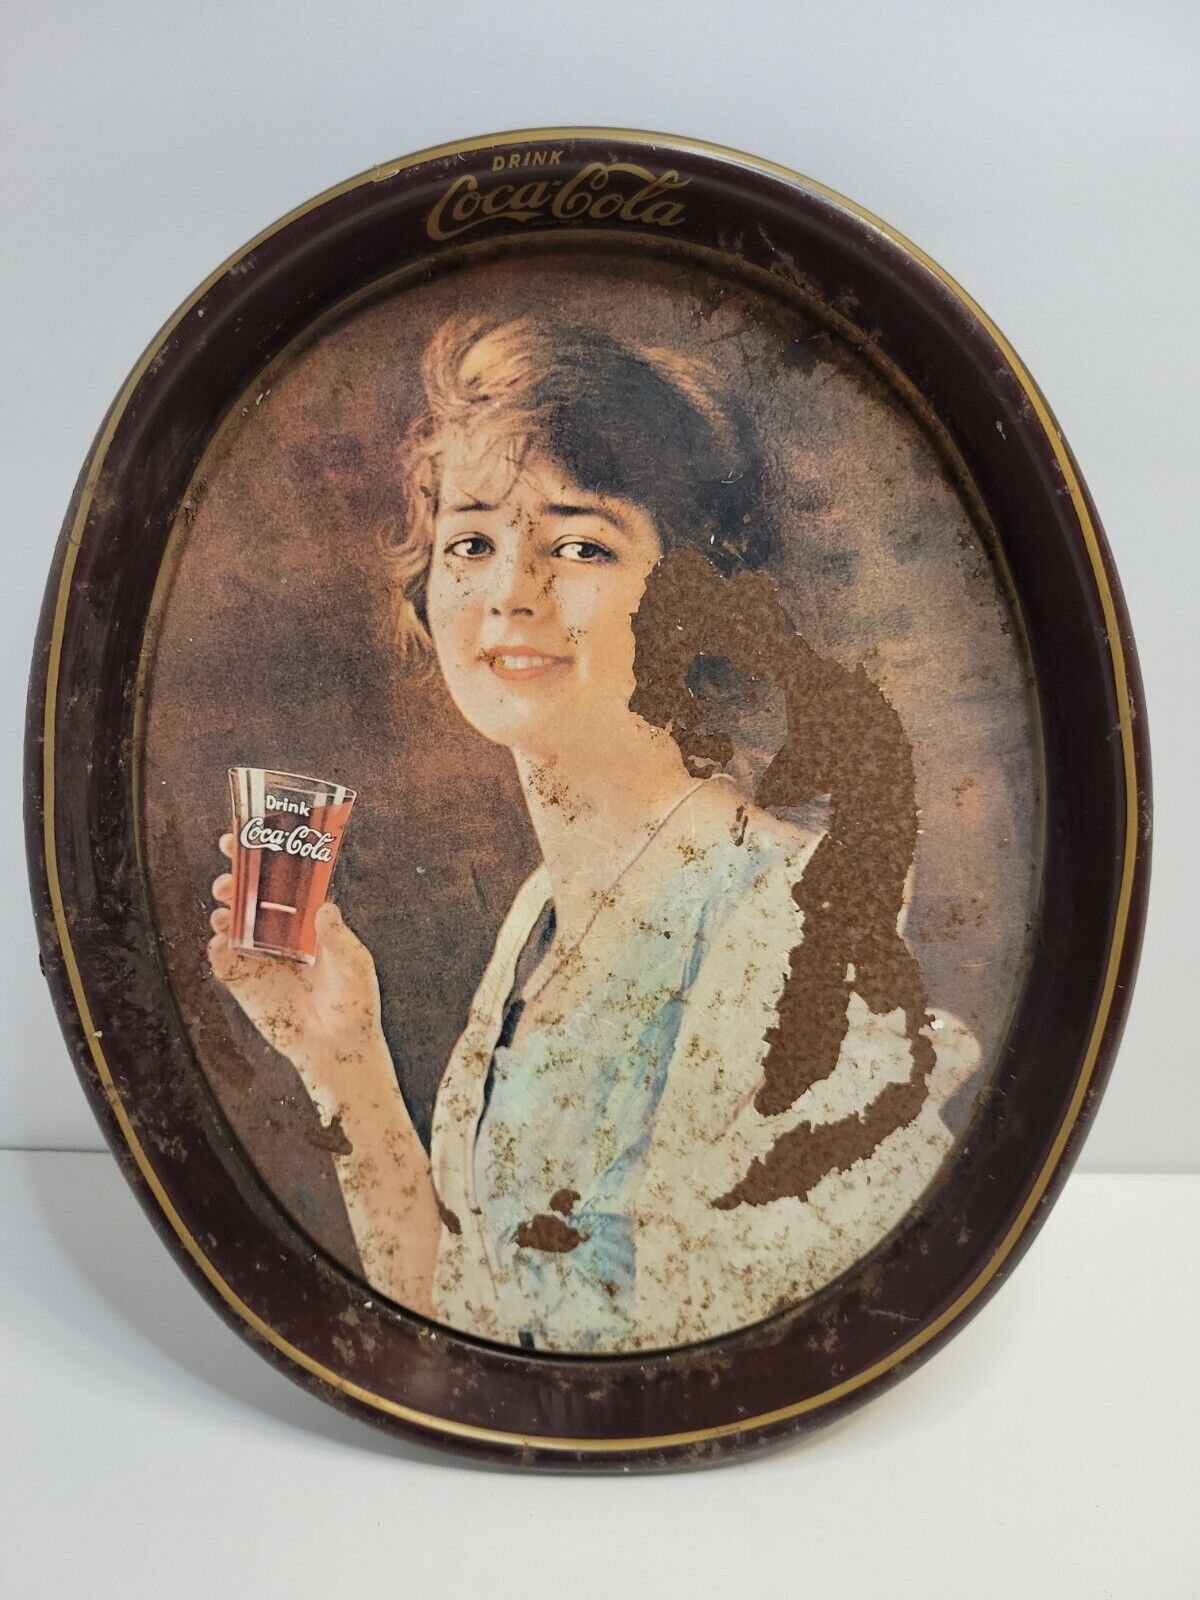 Vintage Drink Coca Cola”Gibson Girl” Oval Tin Tray 1973 Soda Drink Advertising 